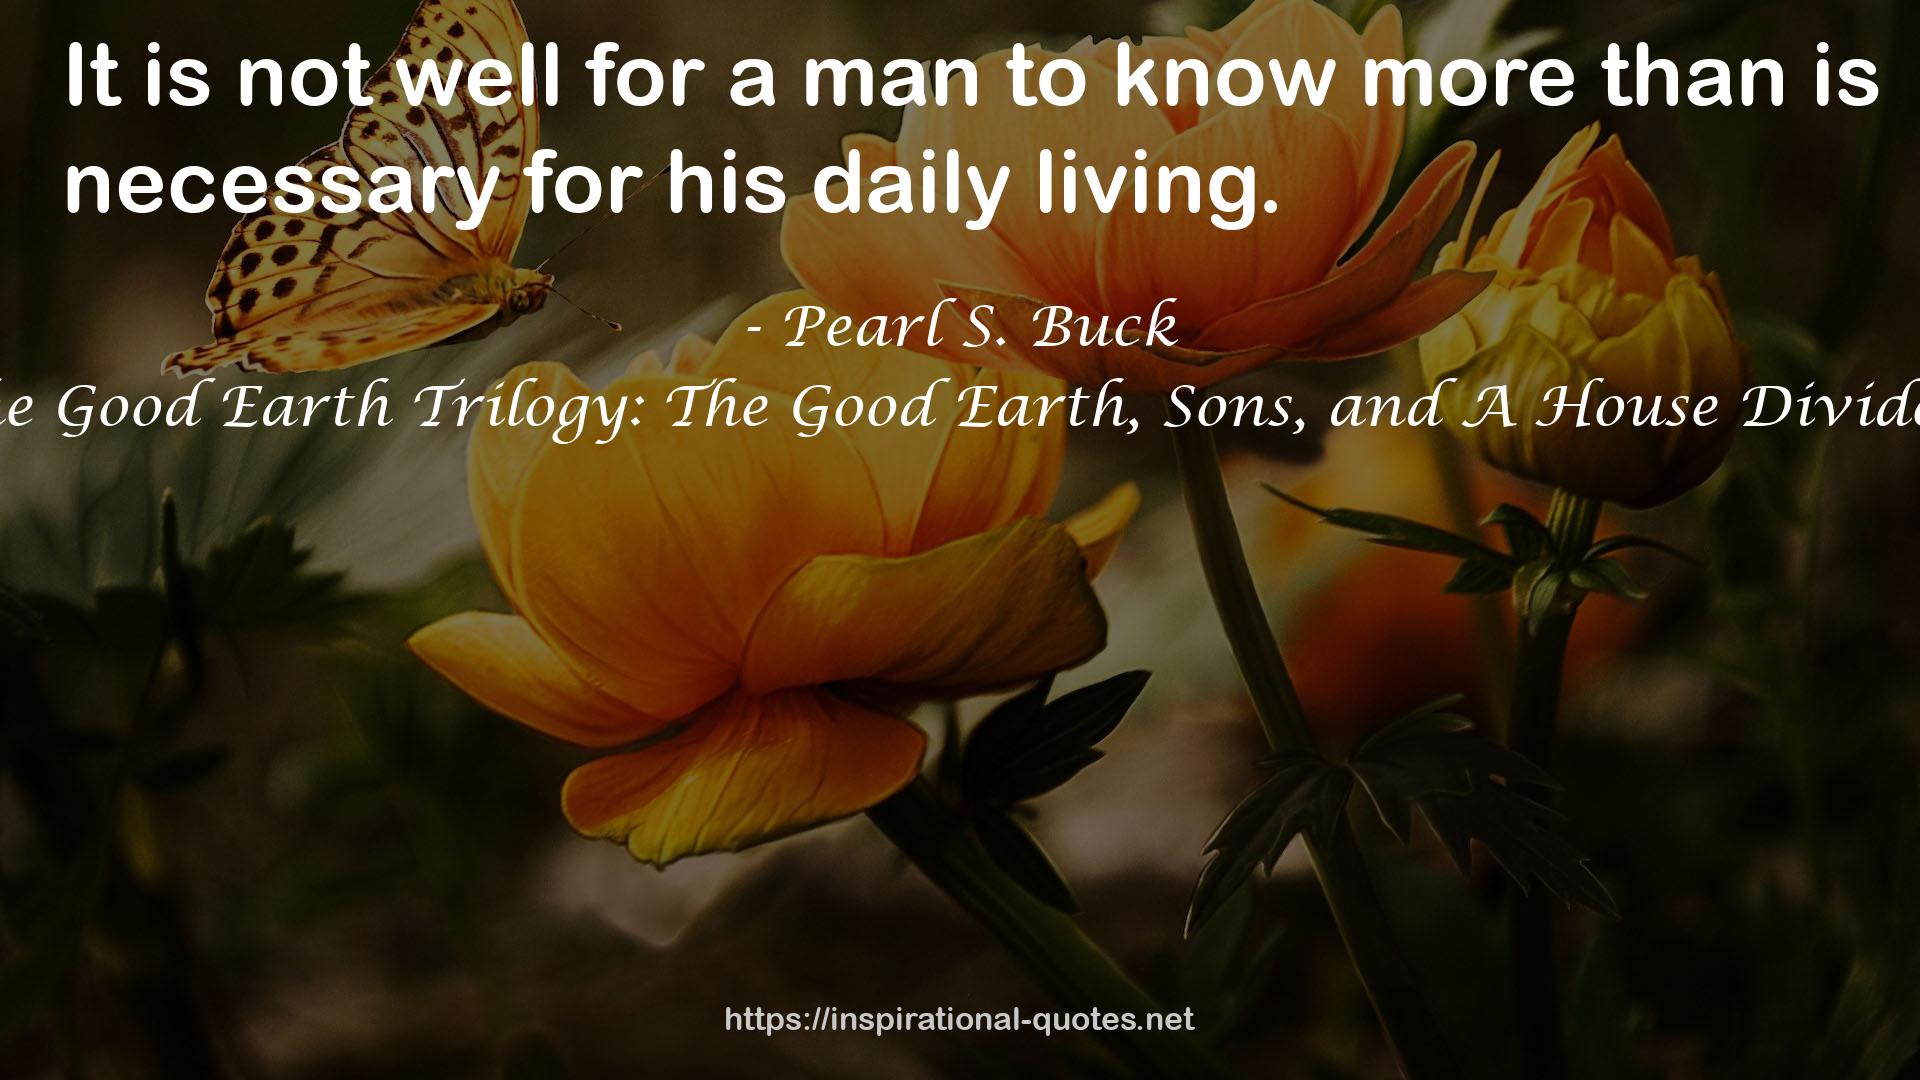 The Good Earth Trilogy: The Good Earth, Sons, and A House Divided QUOTES